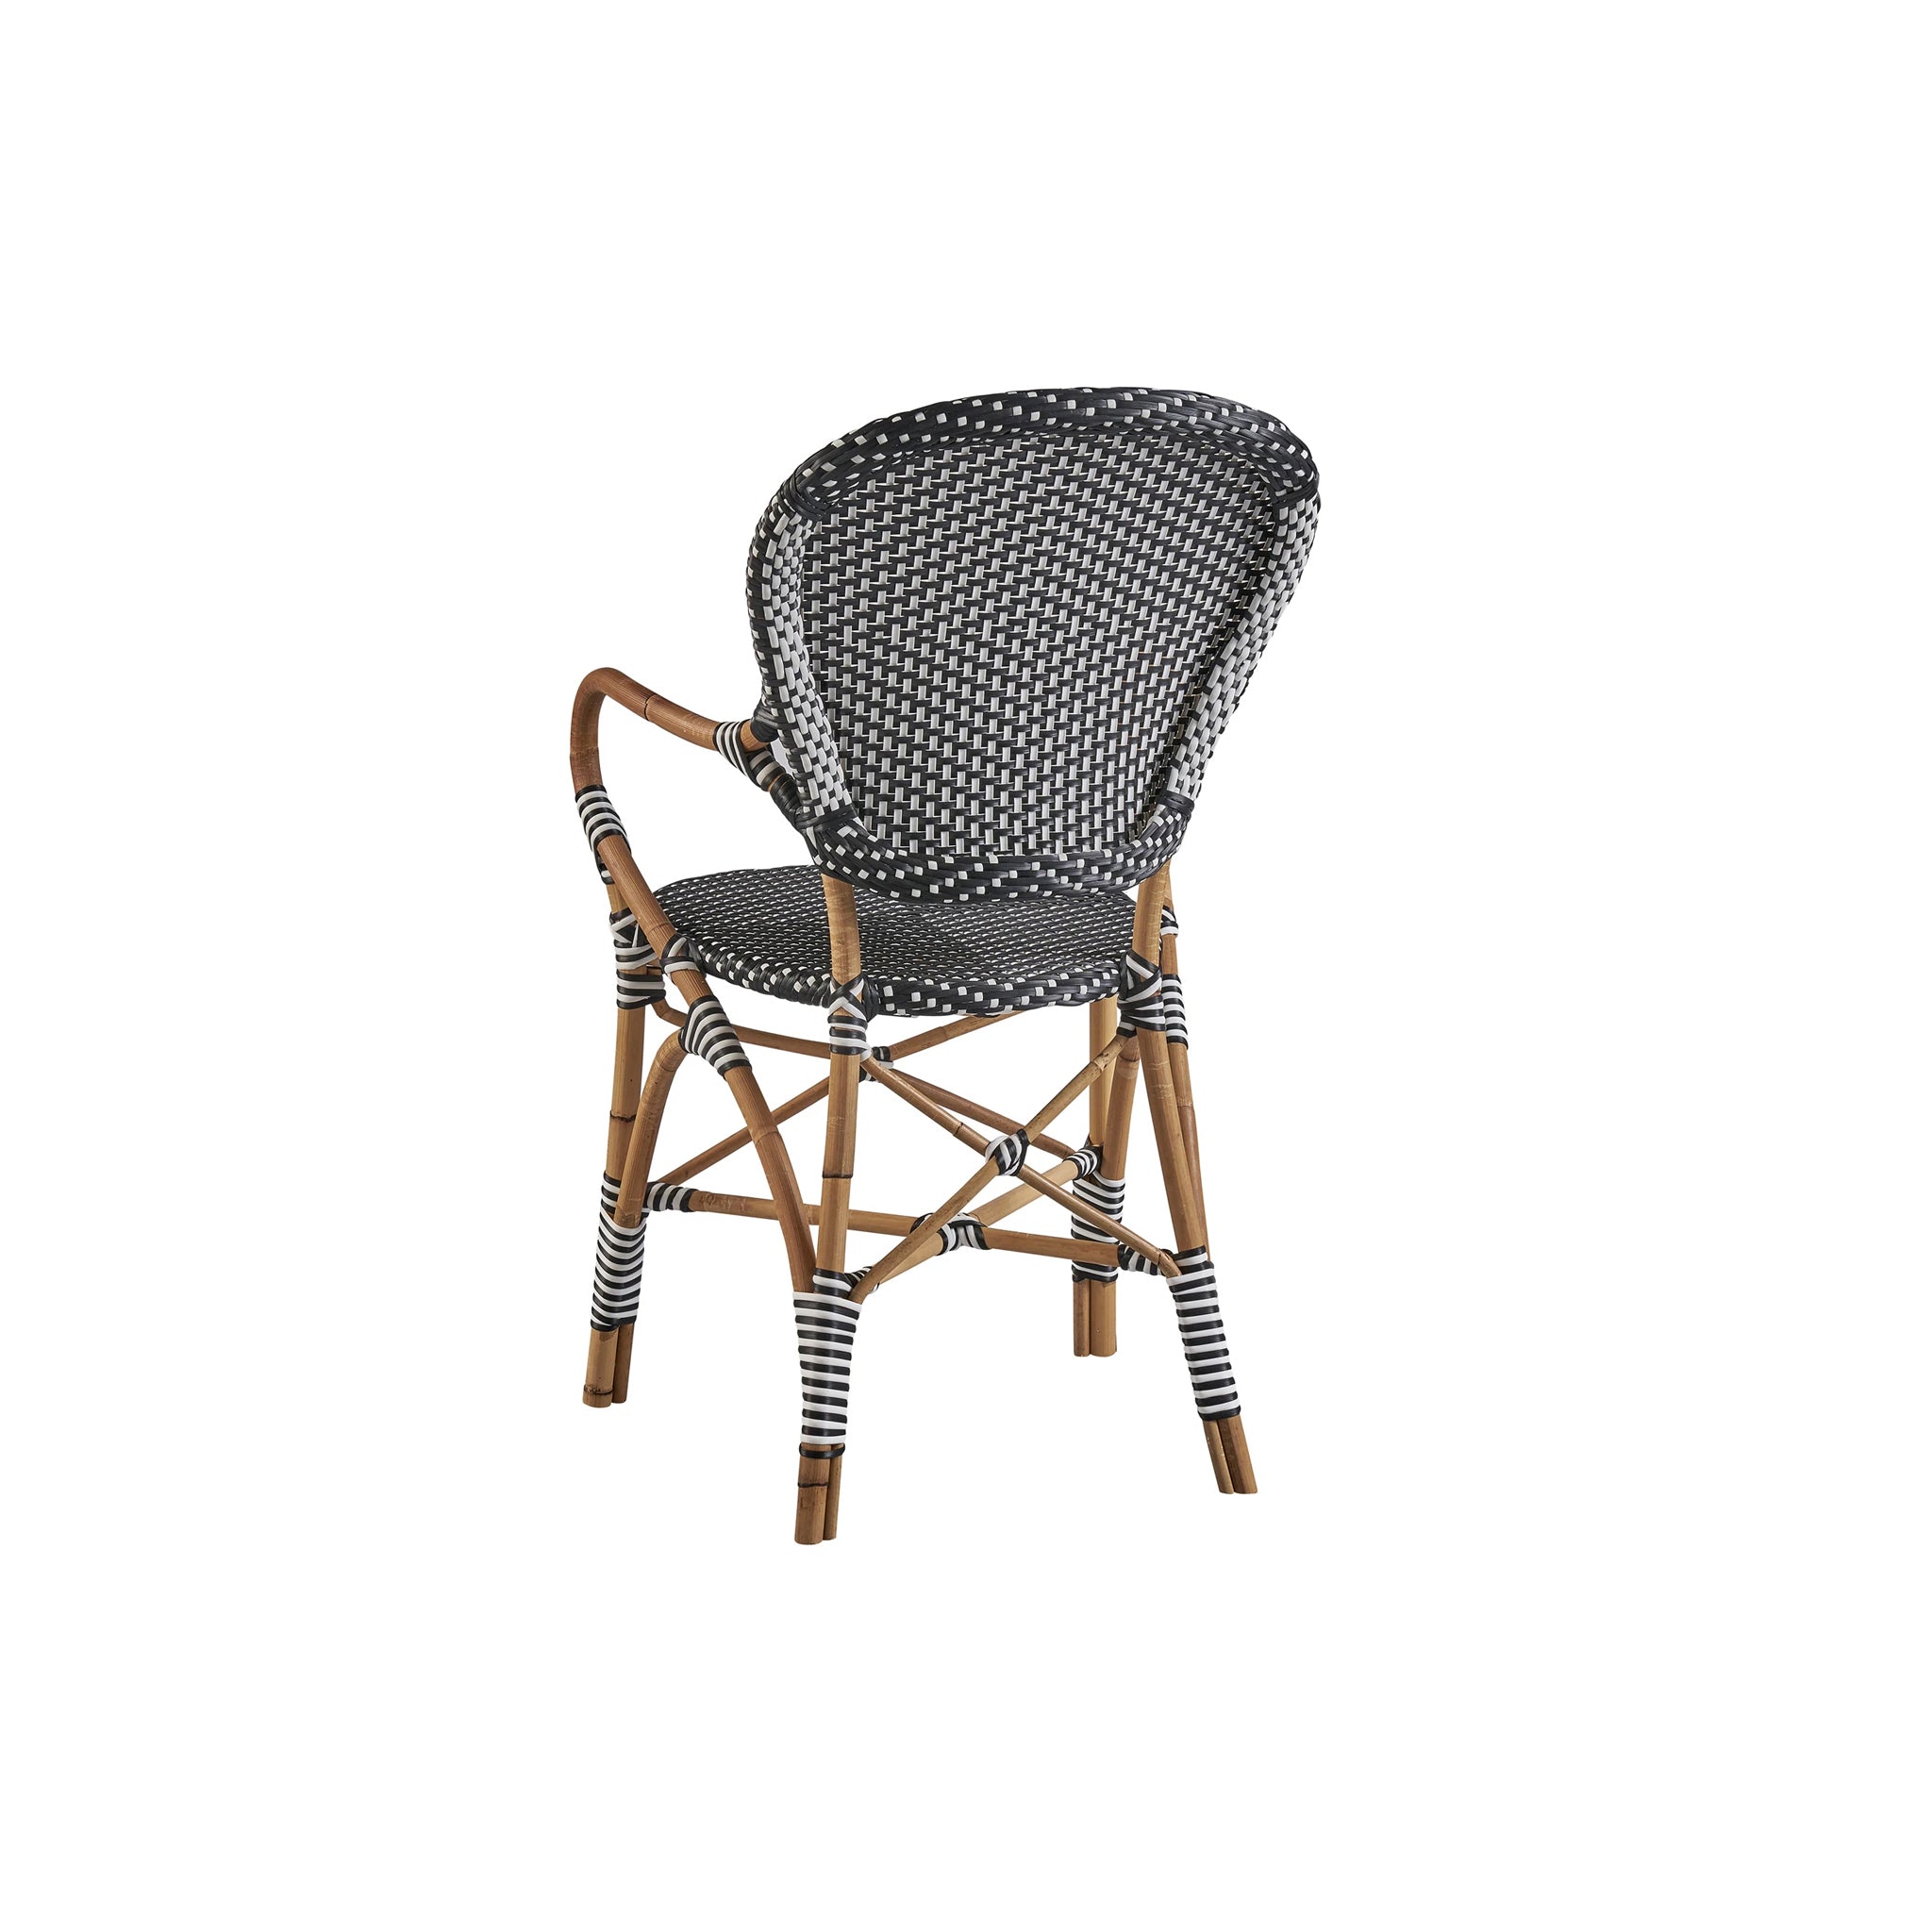 Bamboo and Rattan Bistro Chair - Black and White - Set of 2